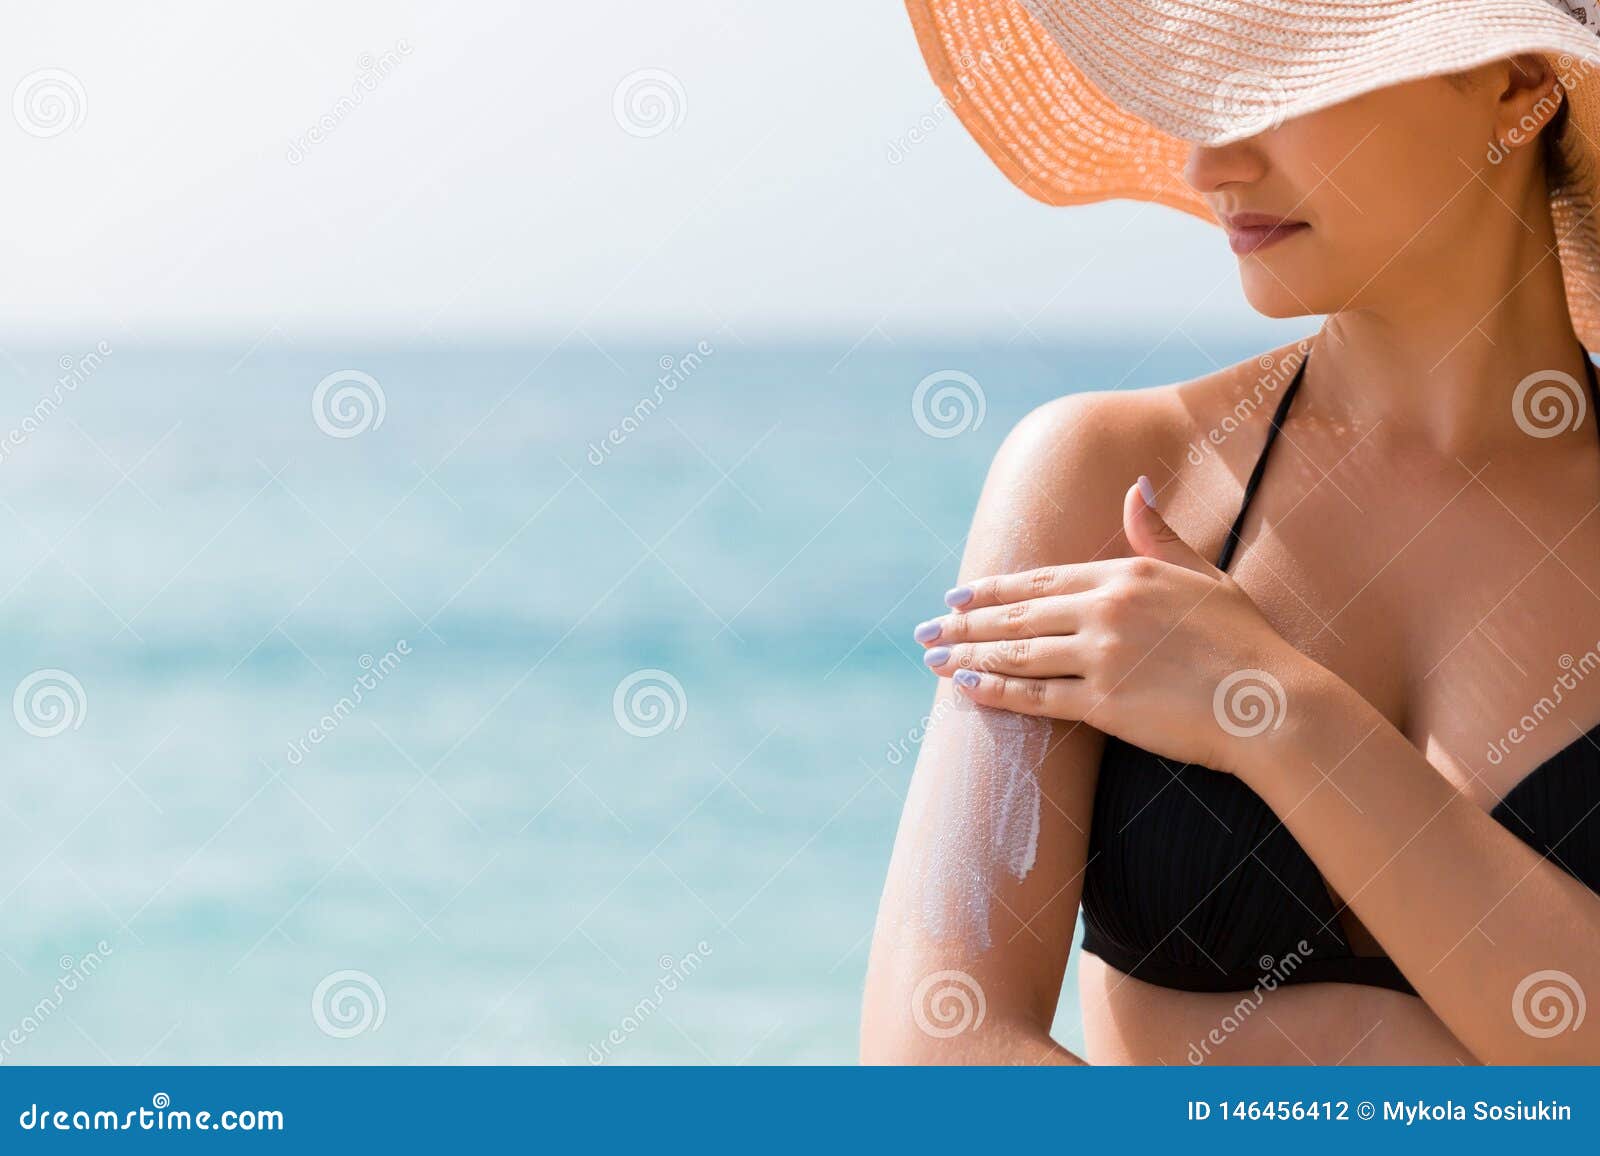 sunscreen sunblock. woman in a hat putting solar cream on shoulder outdoors under sunshine on beautiful summer day